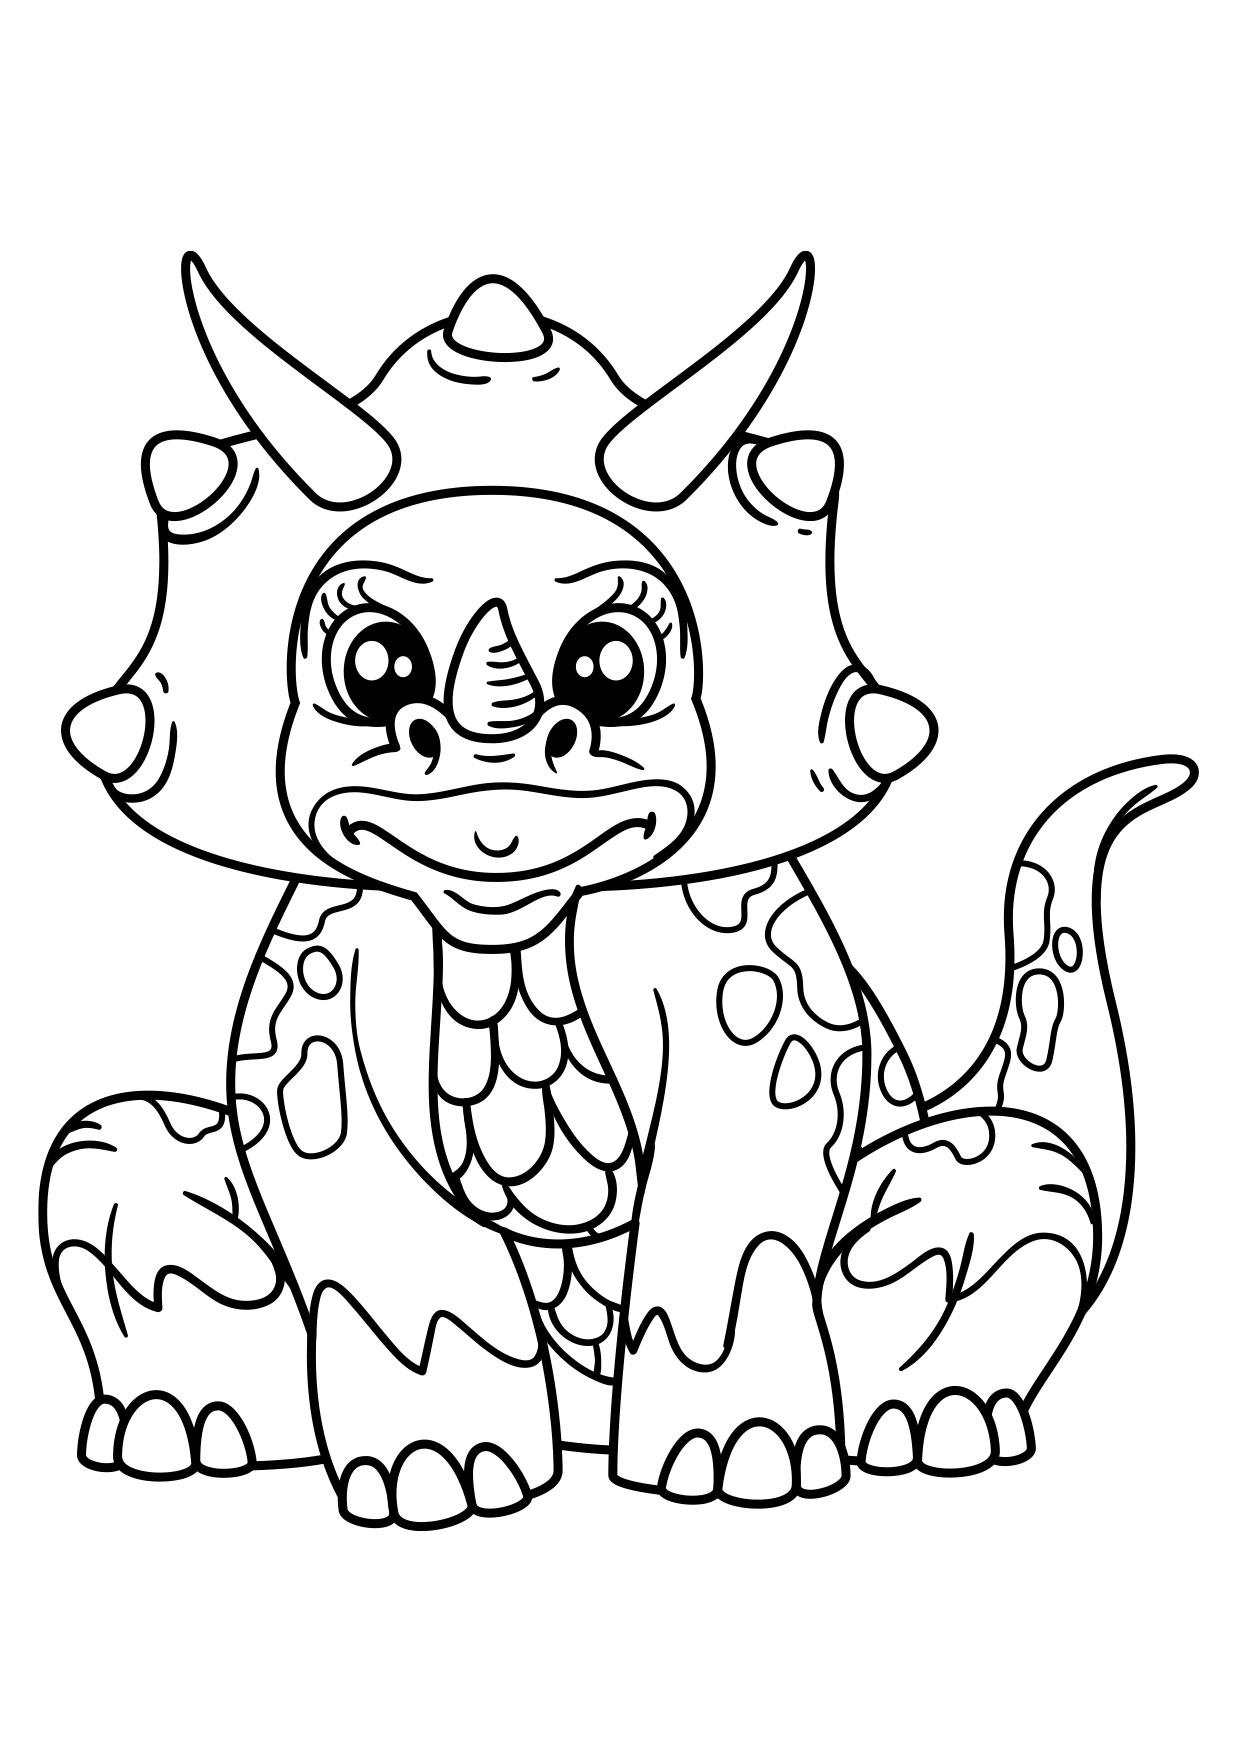 Coloring Page dinosaur girl   free printable coloring pages   Img 30974